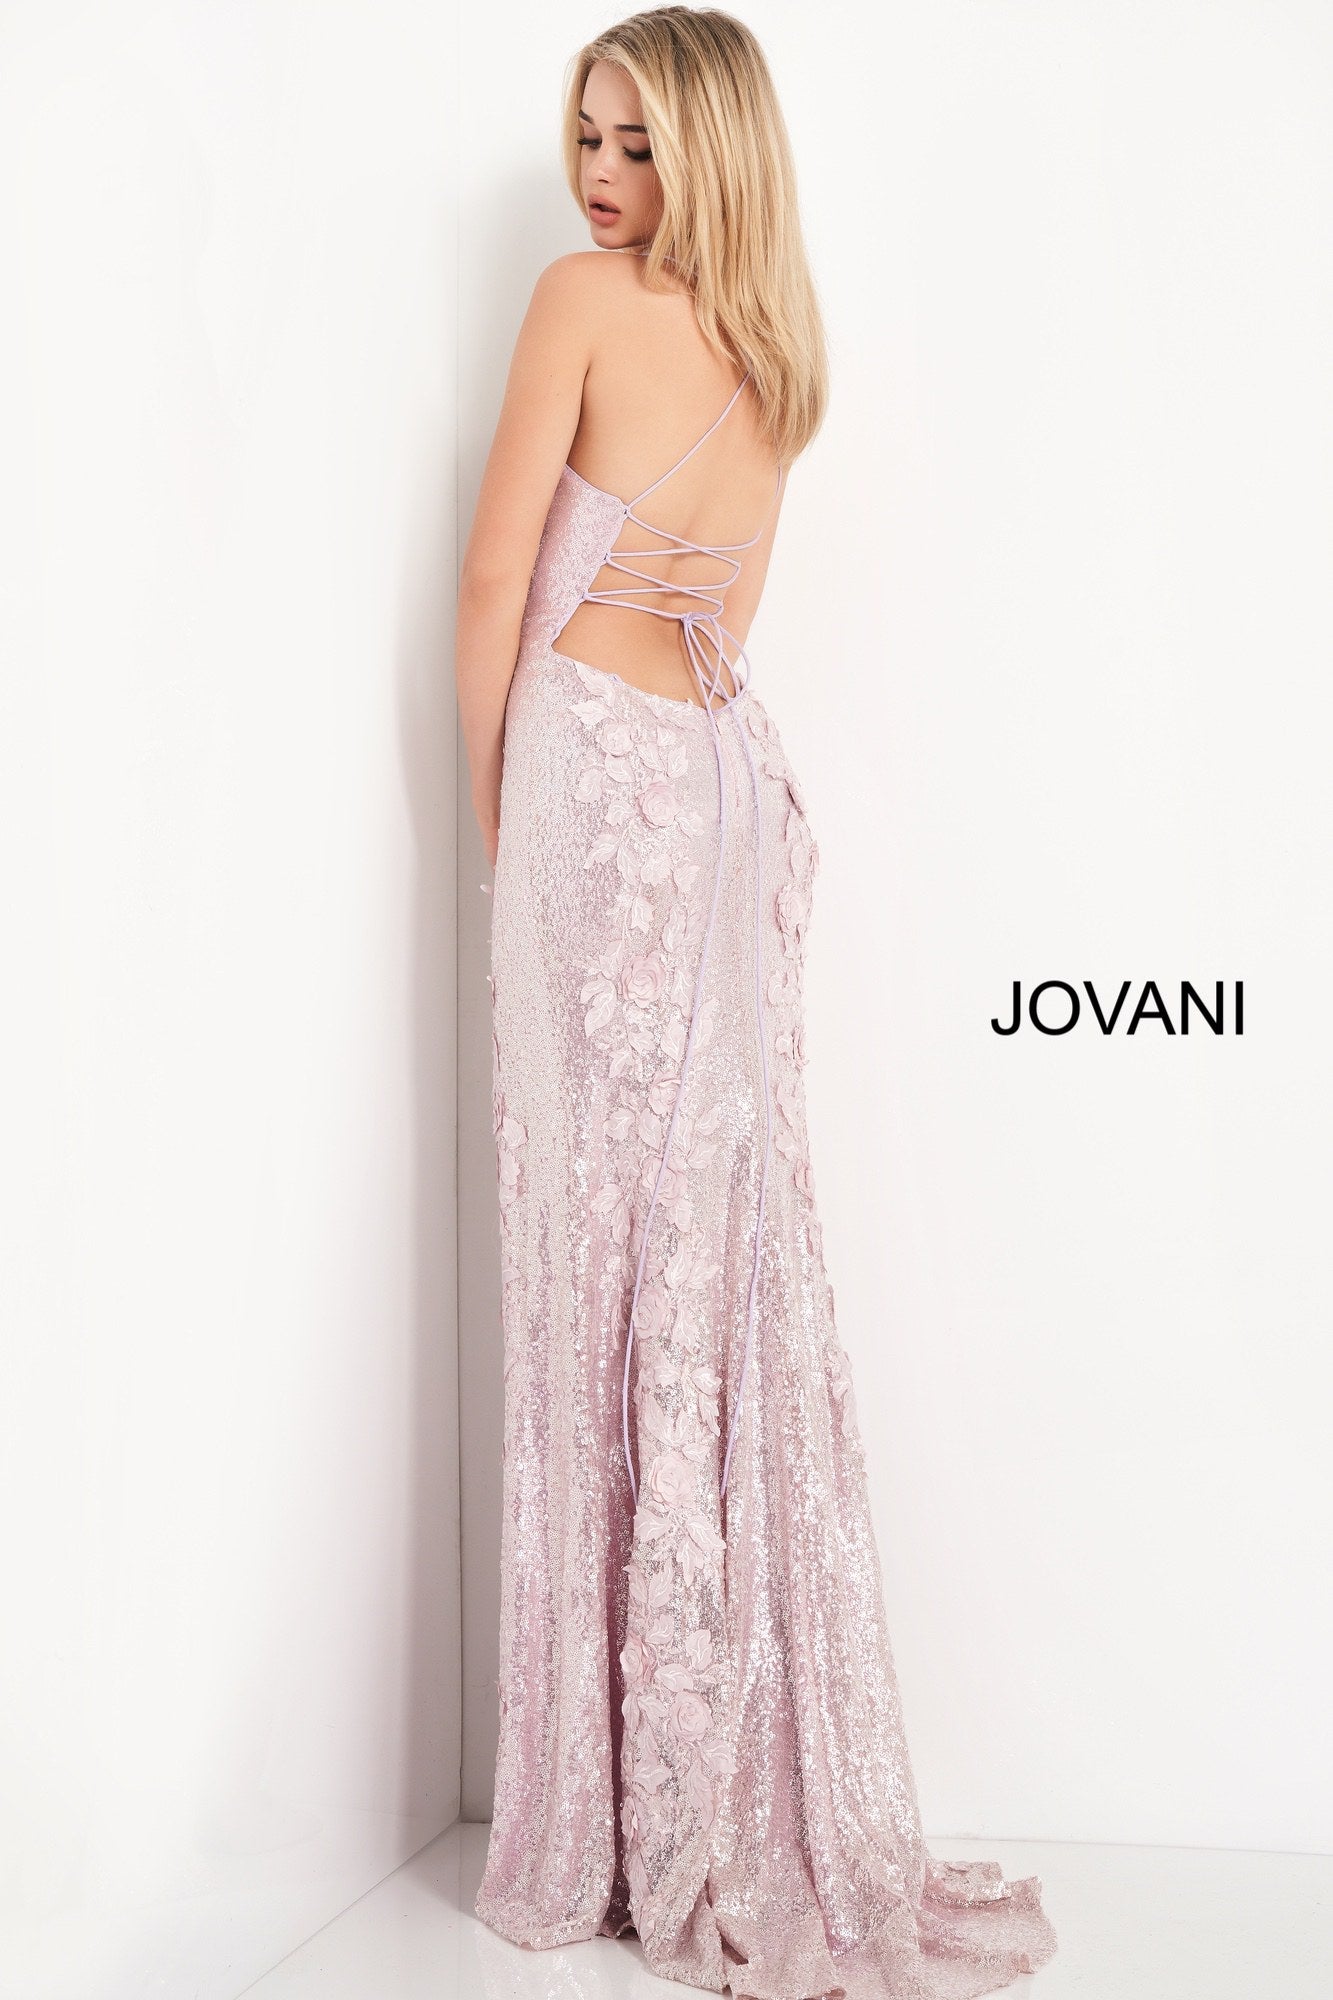 Jovani 06109 is a Long Fitted Sequin Embellished Formal Evening Gown. This Sweetheart neckline prom dress has spaghetti straps that lead around to an open back with a lace up corset tie closure. Detailed 3D Floral Appliques Embellished the fitted bodice & Cascade down the length of this gorgeous Pageant Gown. Thigh Slit in Skirt. Embellishments also adorn the back length of the Gown trailing into a Lush sequin sweeping train.